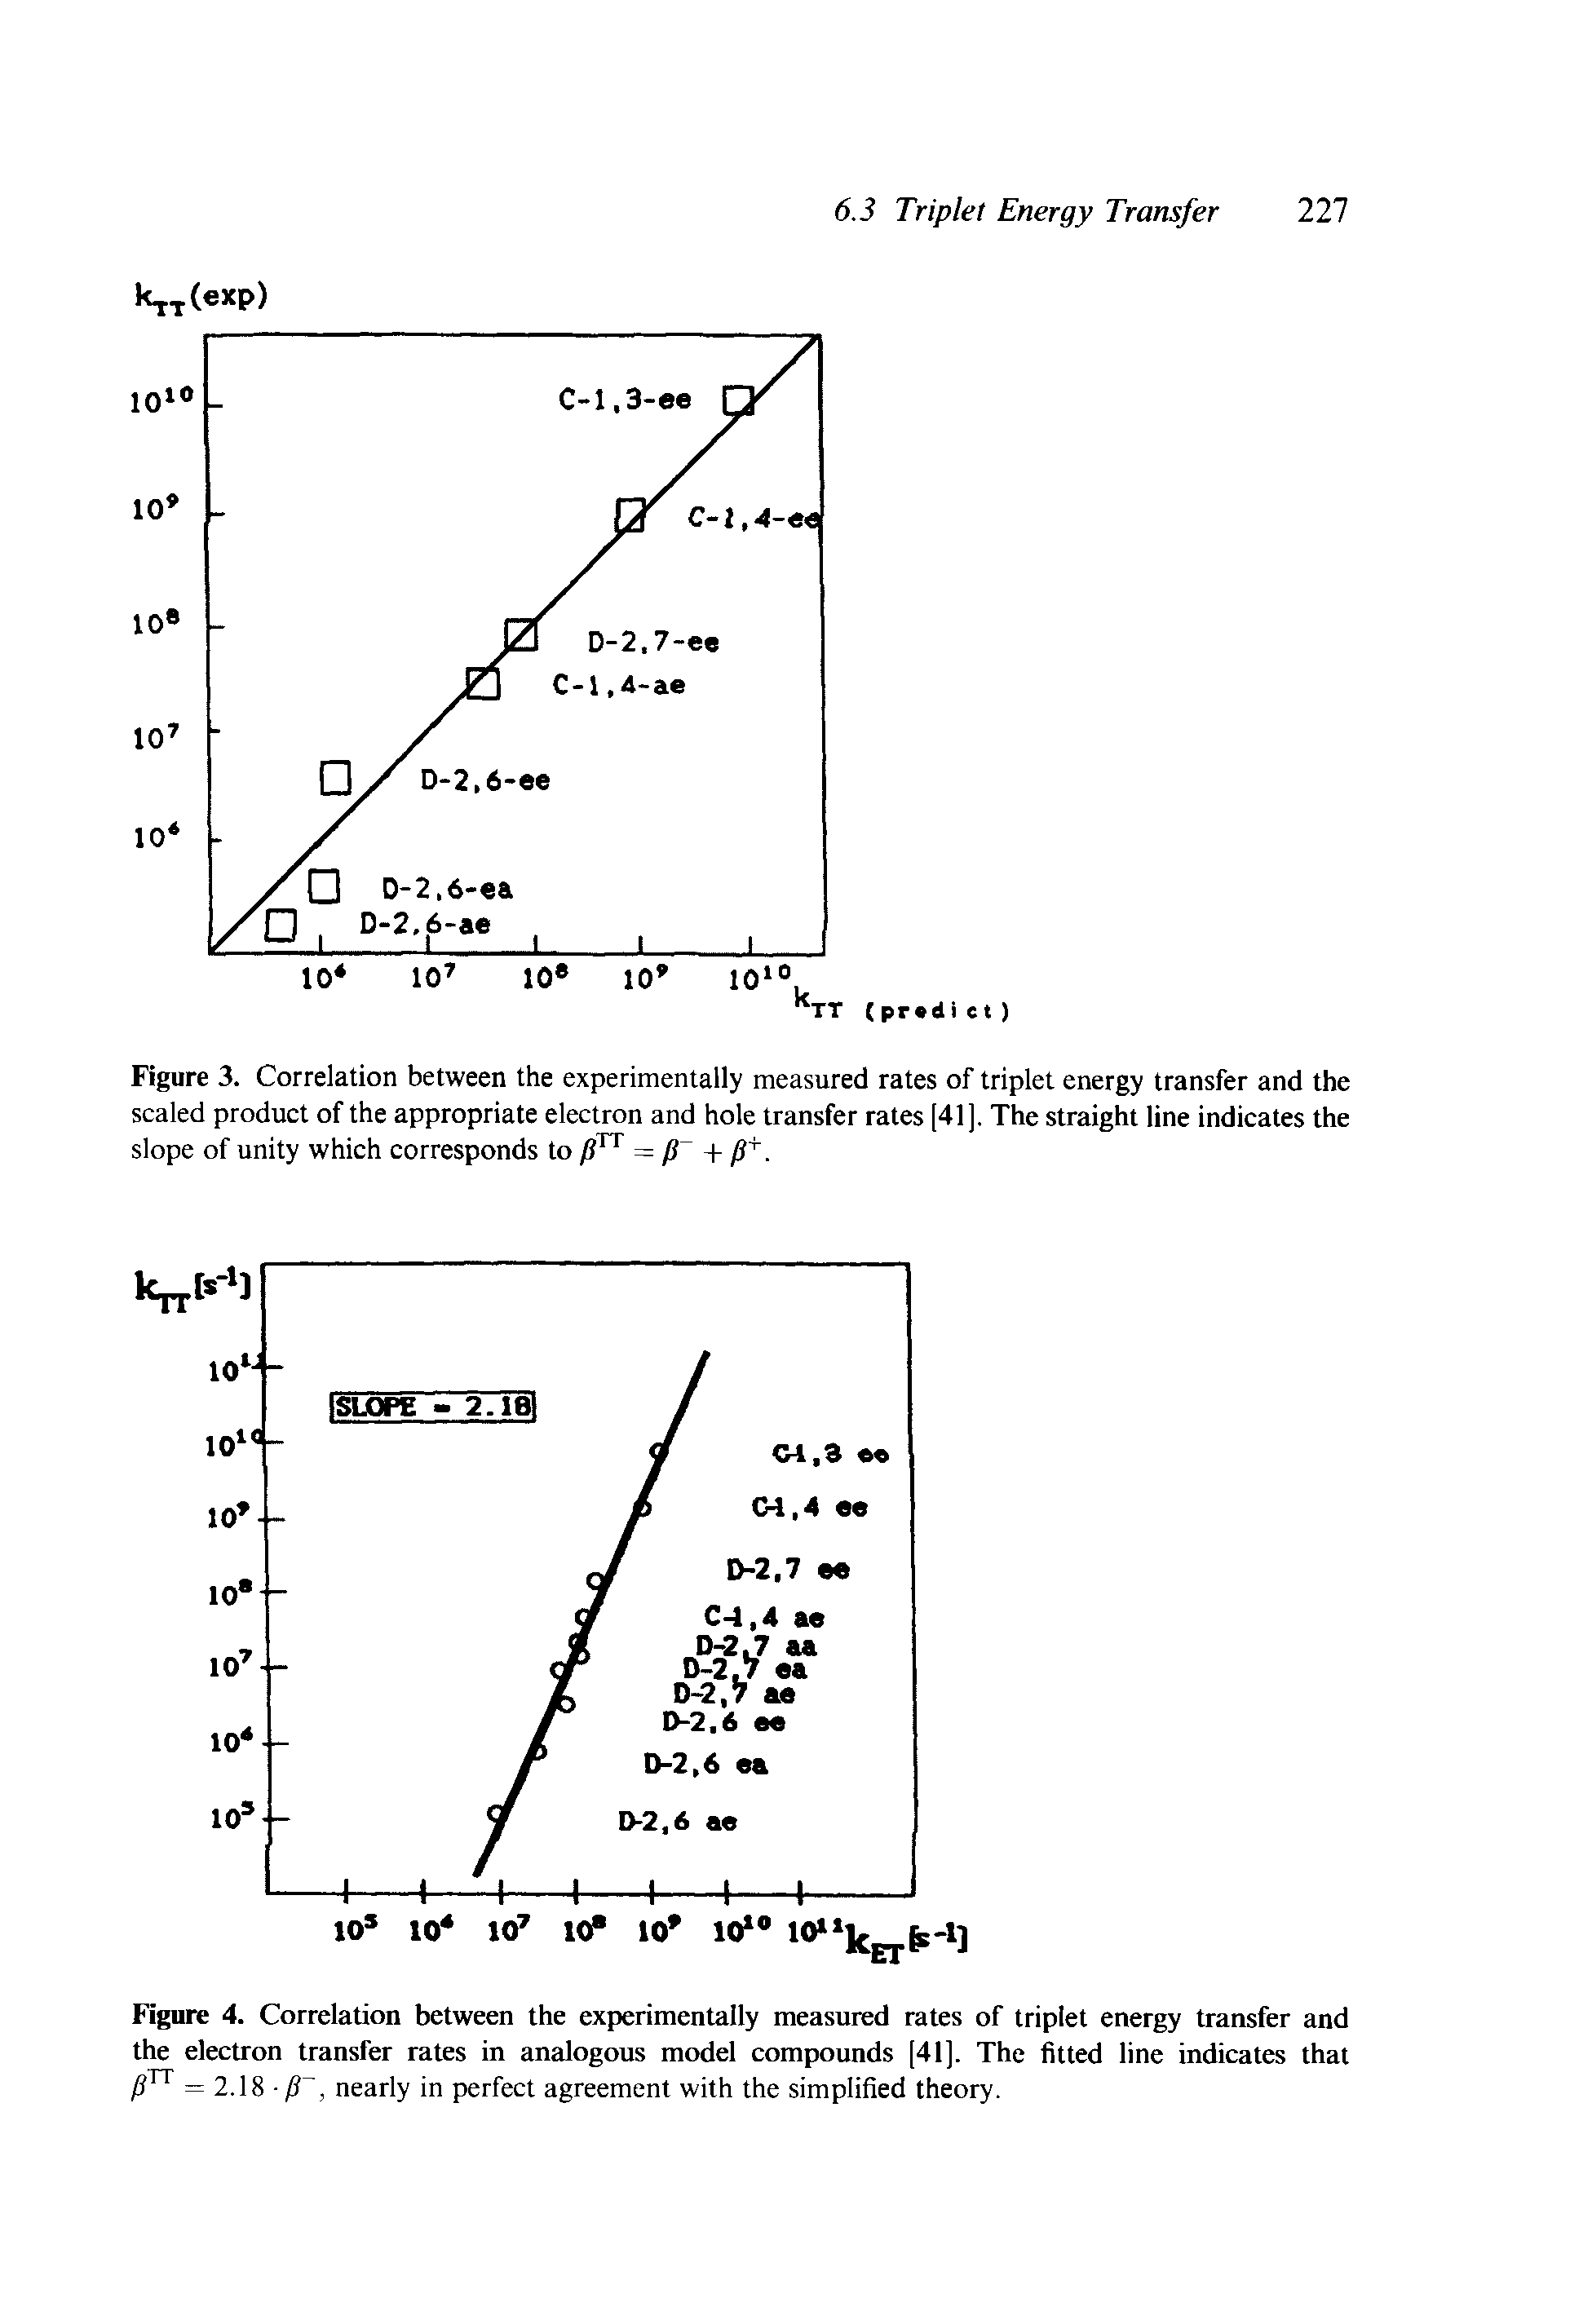 Figure 3. Correlation between the experimentally measured rates of triplet energy transfer and the scaled product of the appropriate electron and hole transfer rates [41]. The straight line indicates the slope of unity which corresponds to = fSy. ...